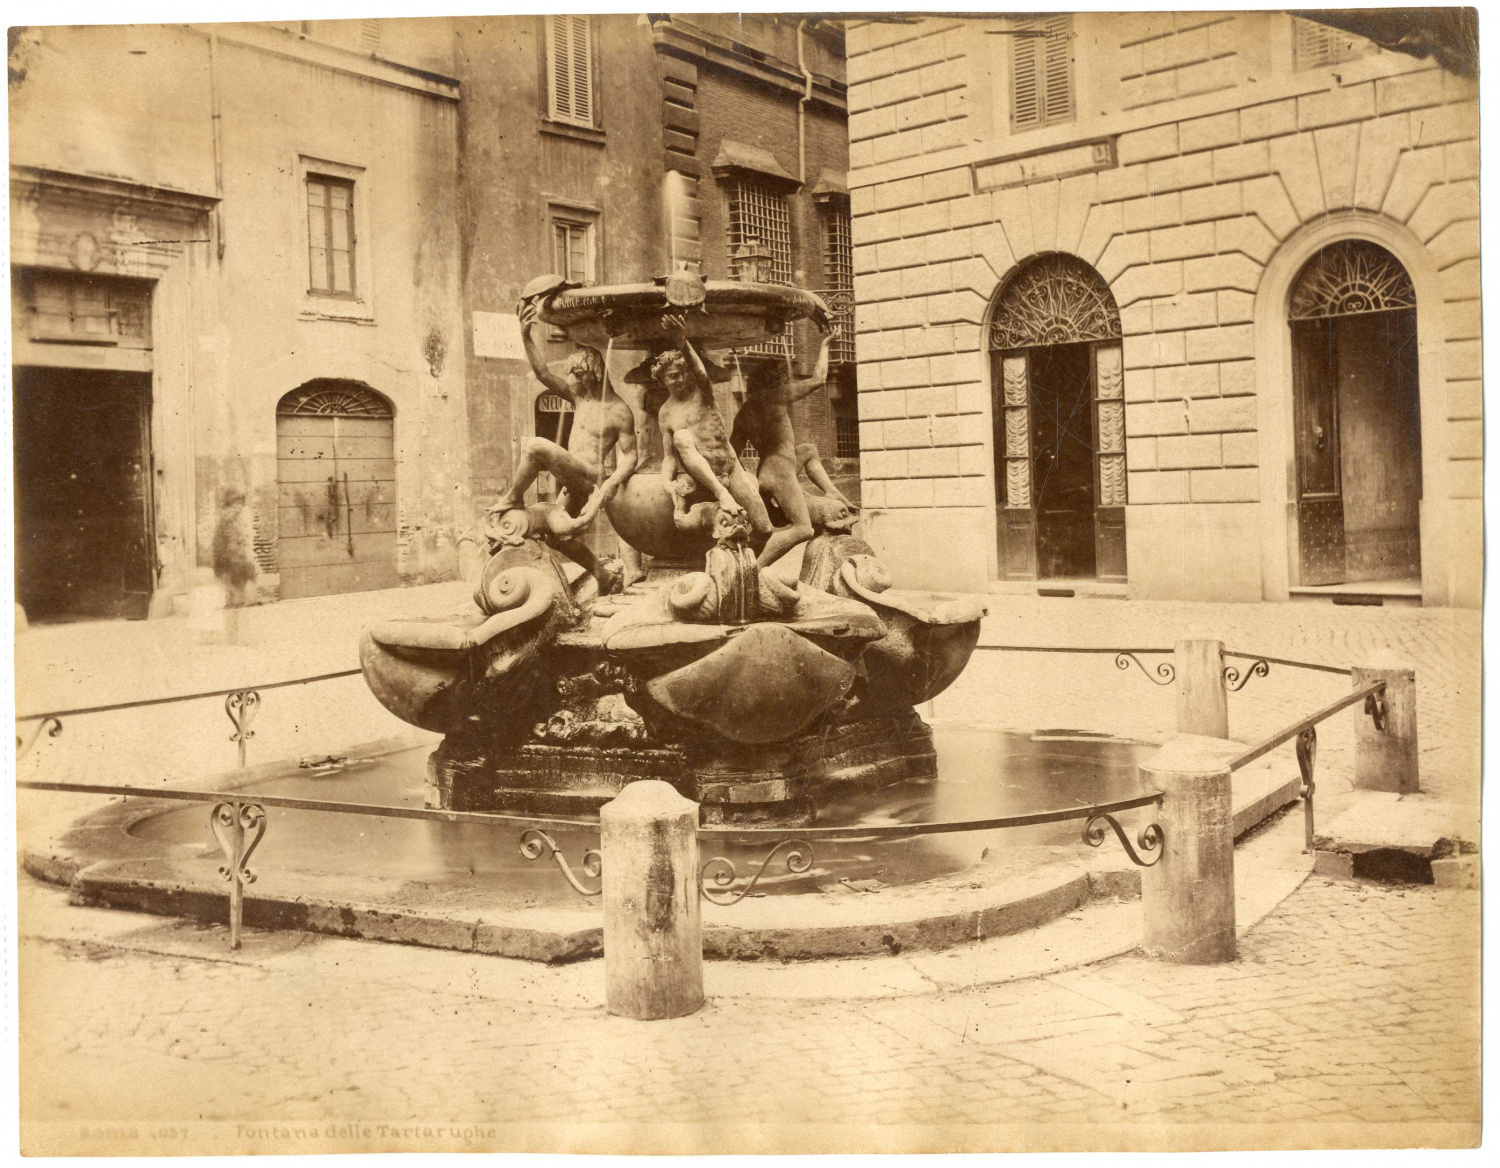 Italie, Rome, Roma, Fontaine des Tortues, fontana delle tartaruche by ...